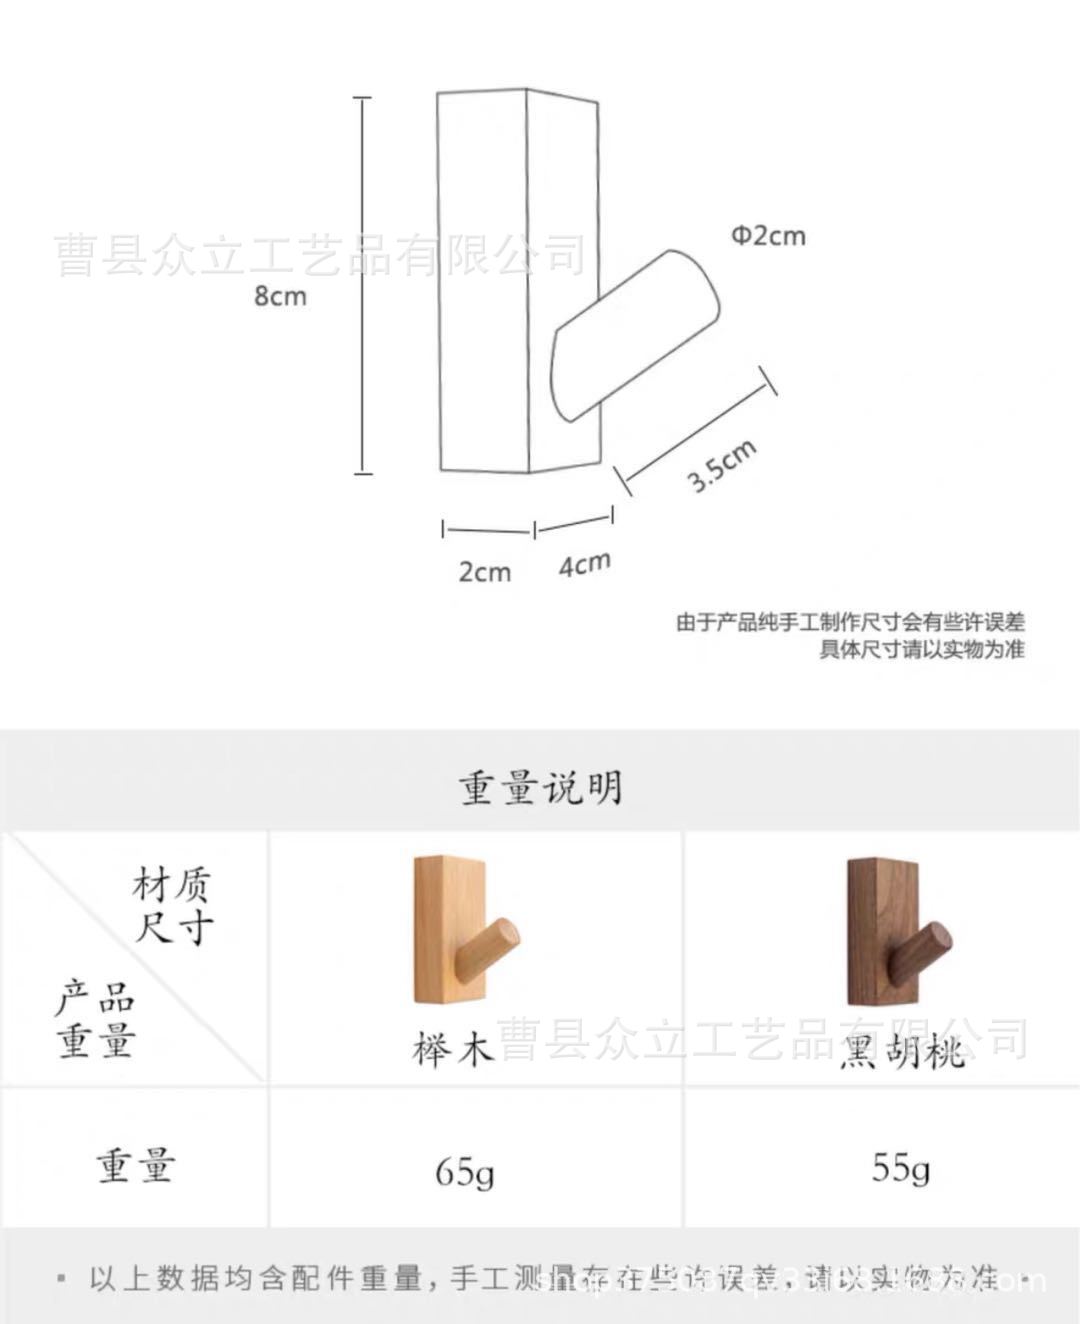 Hanger Hook Wooden Hook Nordic Ins Nail-Free Non-Perforated Clothing Store Wall Sticky Hook Stress Wall Hook